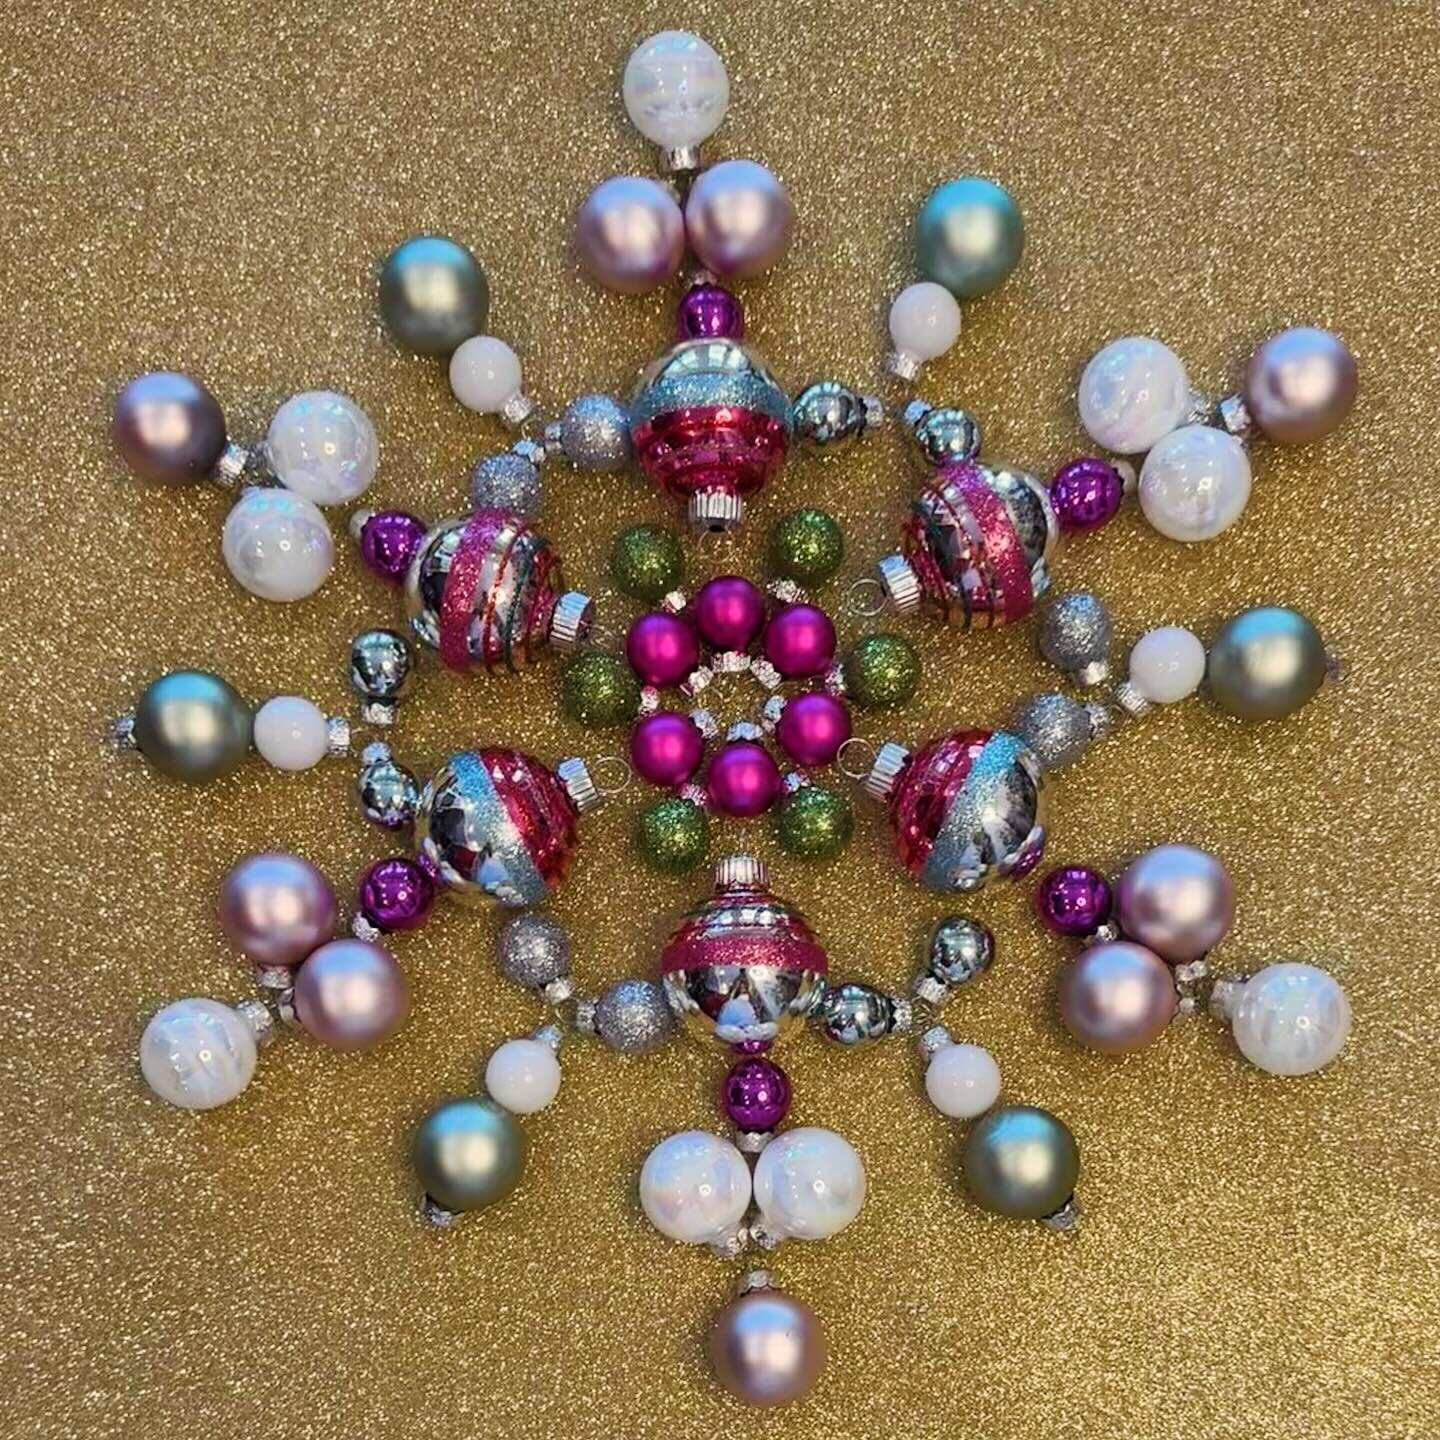 The weather outside is legit frightful. Like if we weren&rsquo;t getting a new roof for Christmas I&rsquo;d be concerned about the impromptu water feature upstairs 
#cookiesforbreakfast 

#mandala #holidaymandala #christmasdecor #christmasornaments #